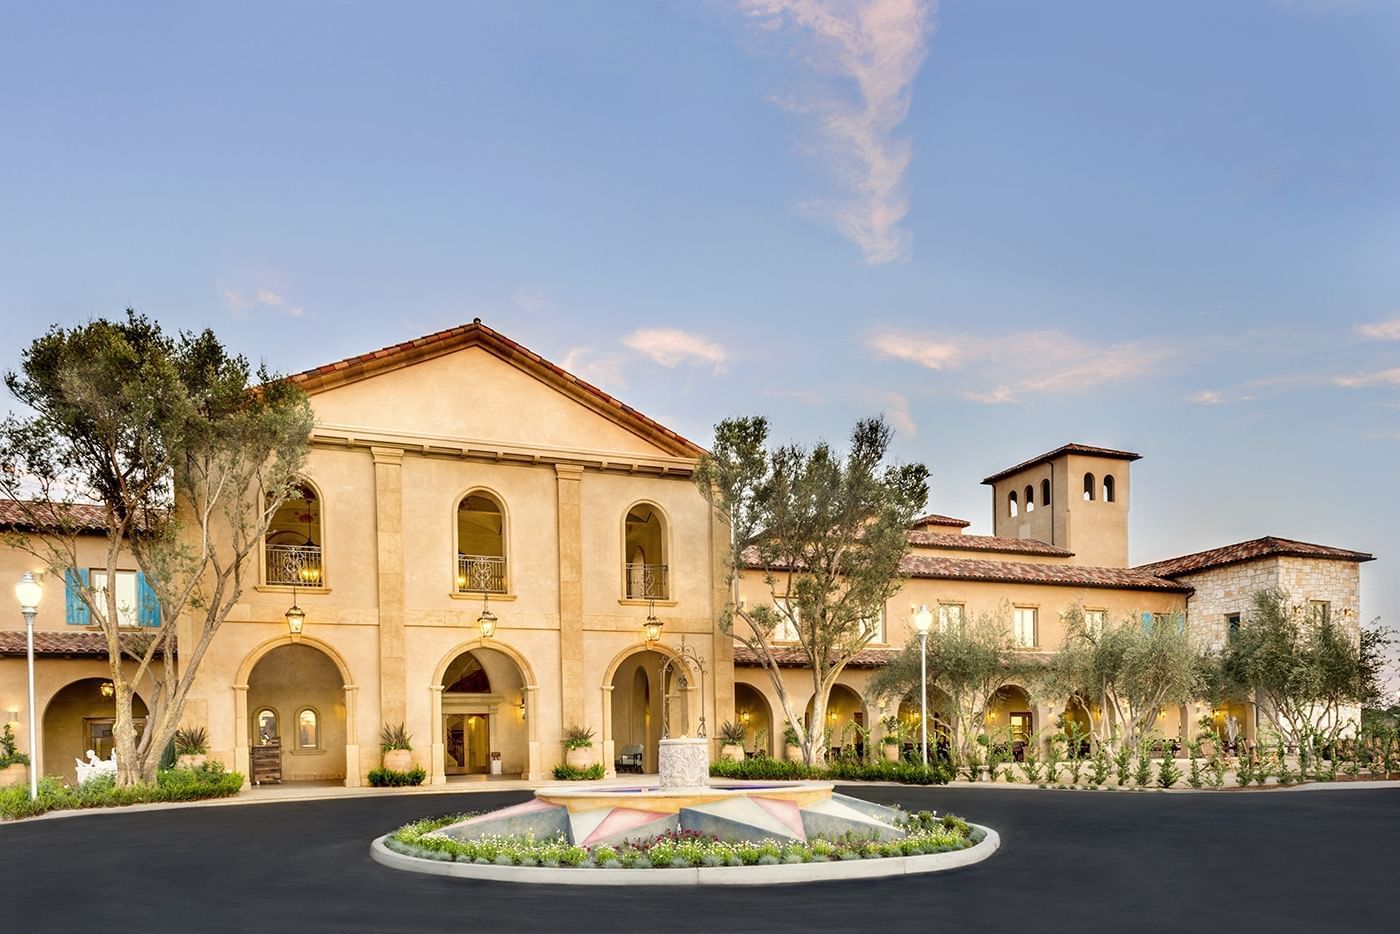 Allegretto Vineyard Resort round about Entrance in Paso Robles